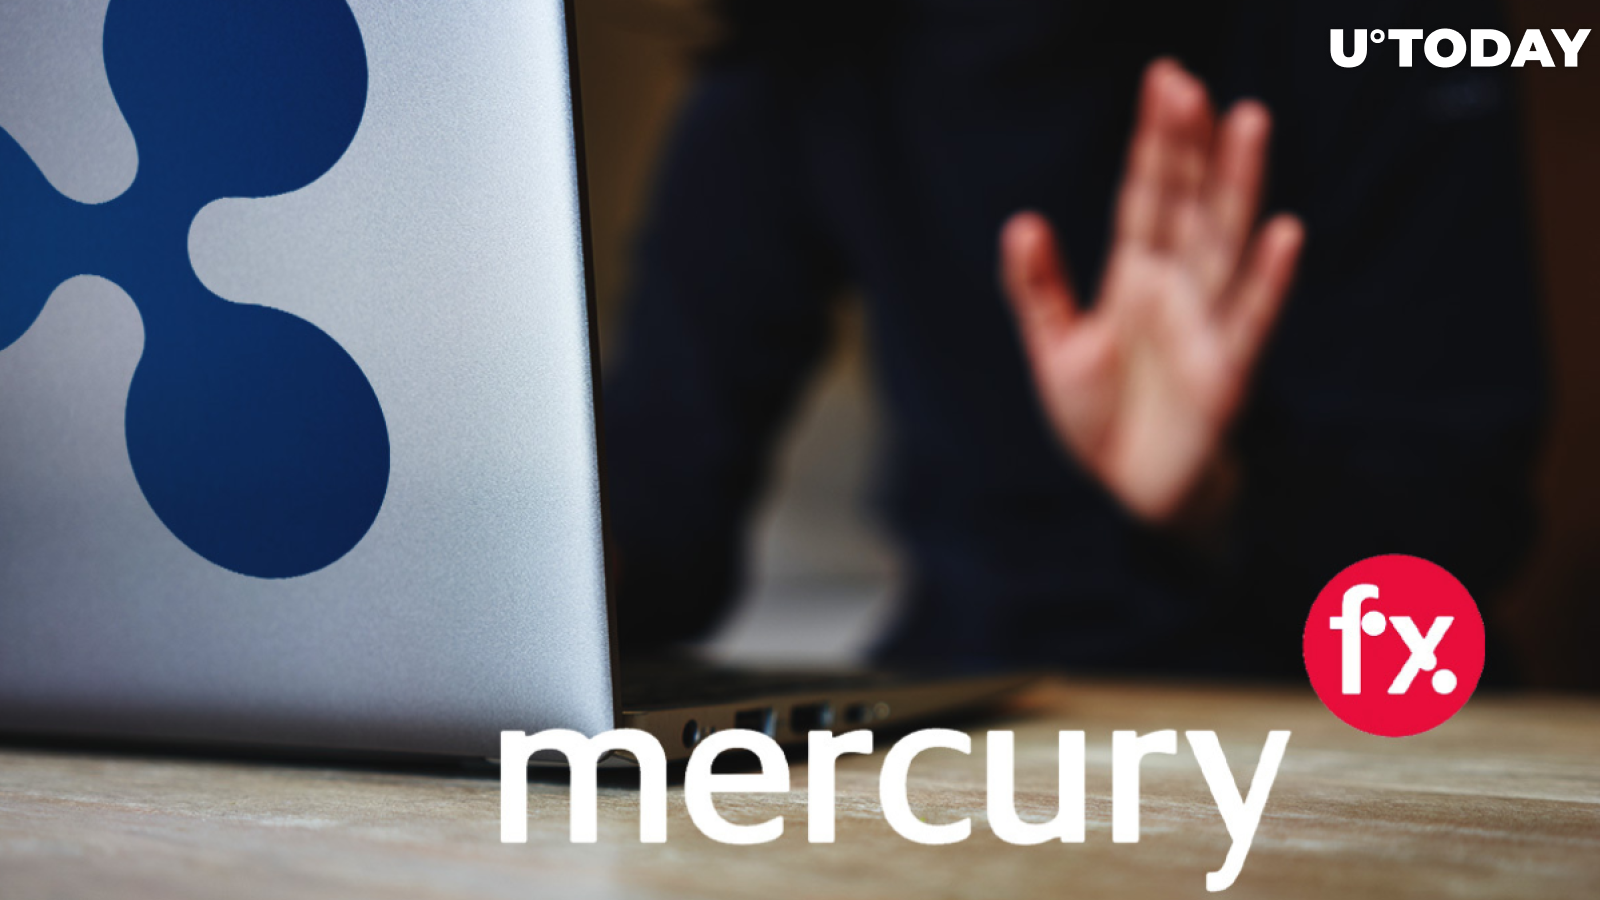 Ripple's Partner Mercury FX Confirms It Still Uses XRP, Teases 'Some Exciting News'